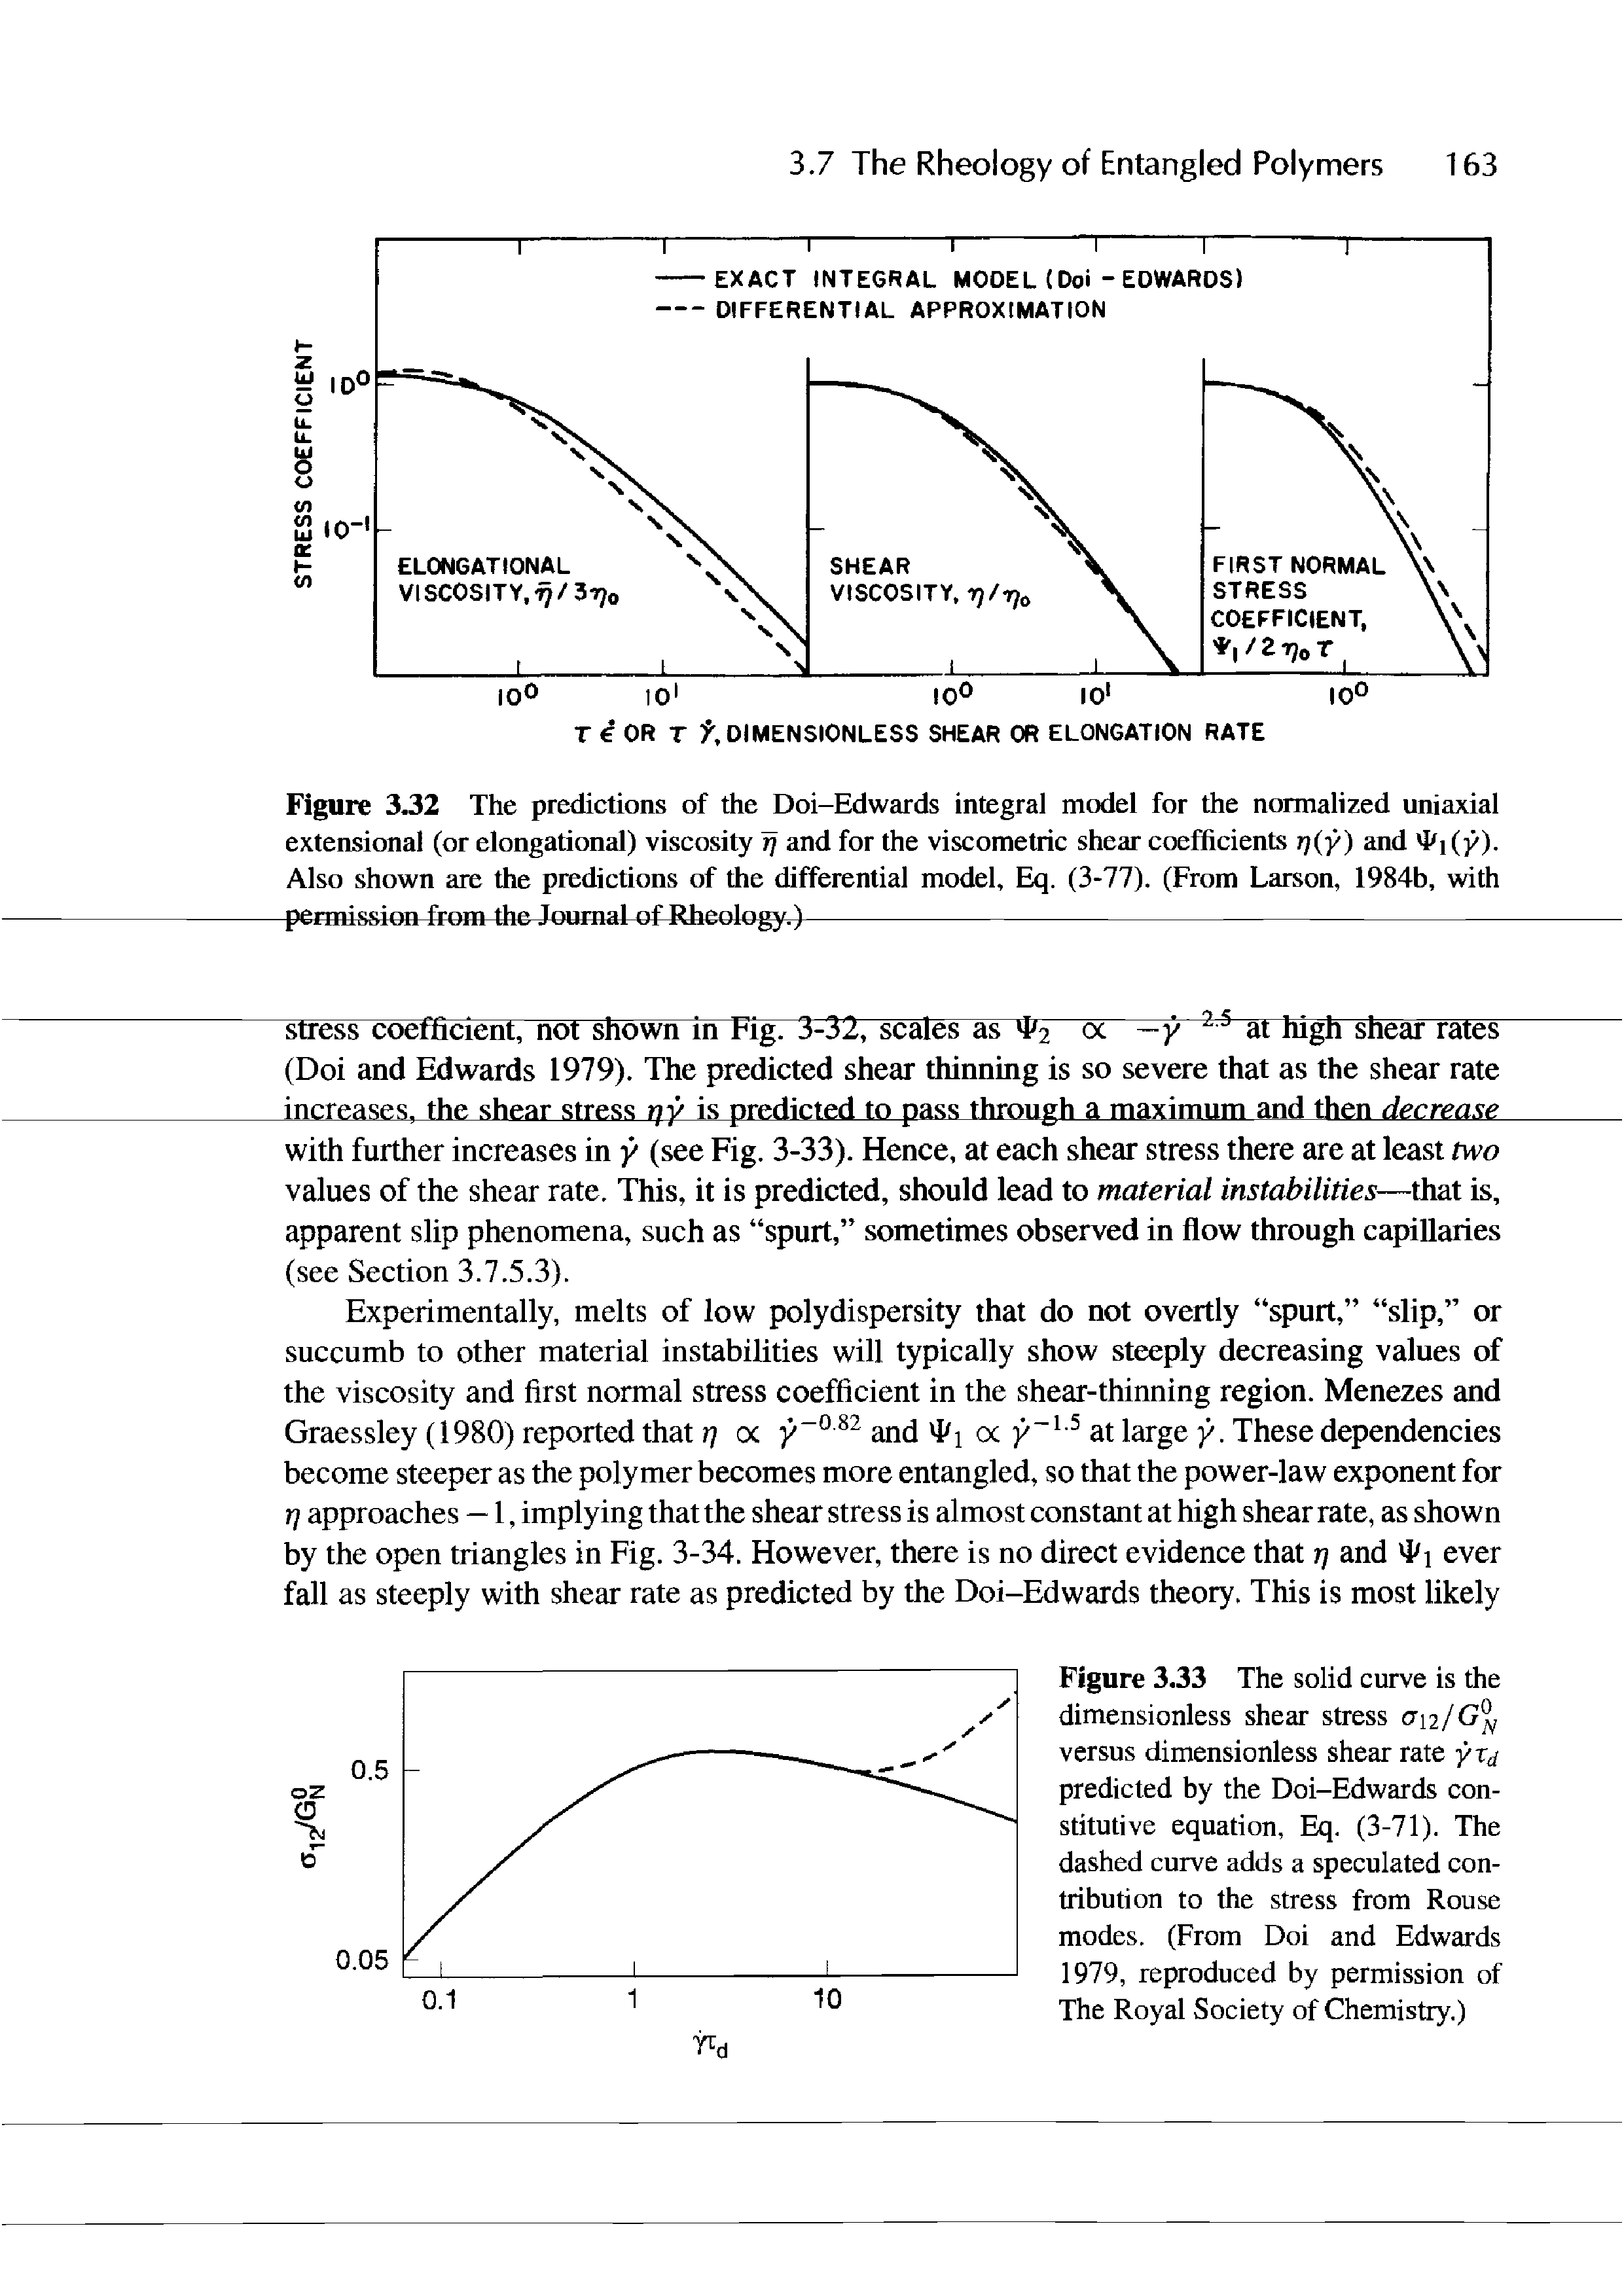 Figure 3.33 The solid curve is the dimensionless shear stress versus dimensionless shear rate yrd predicted by the Doi-Edwards constitutive equation, Eq. (3-71). The dashed curve adds a speculated contribution to the stress from Rouse modes. (From Doi and Edwards 1979, reproduced by permission of The Royal Society of Chemistry.)...